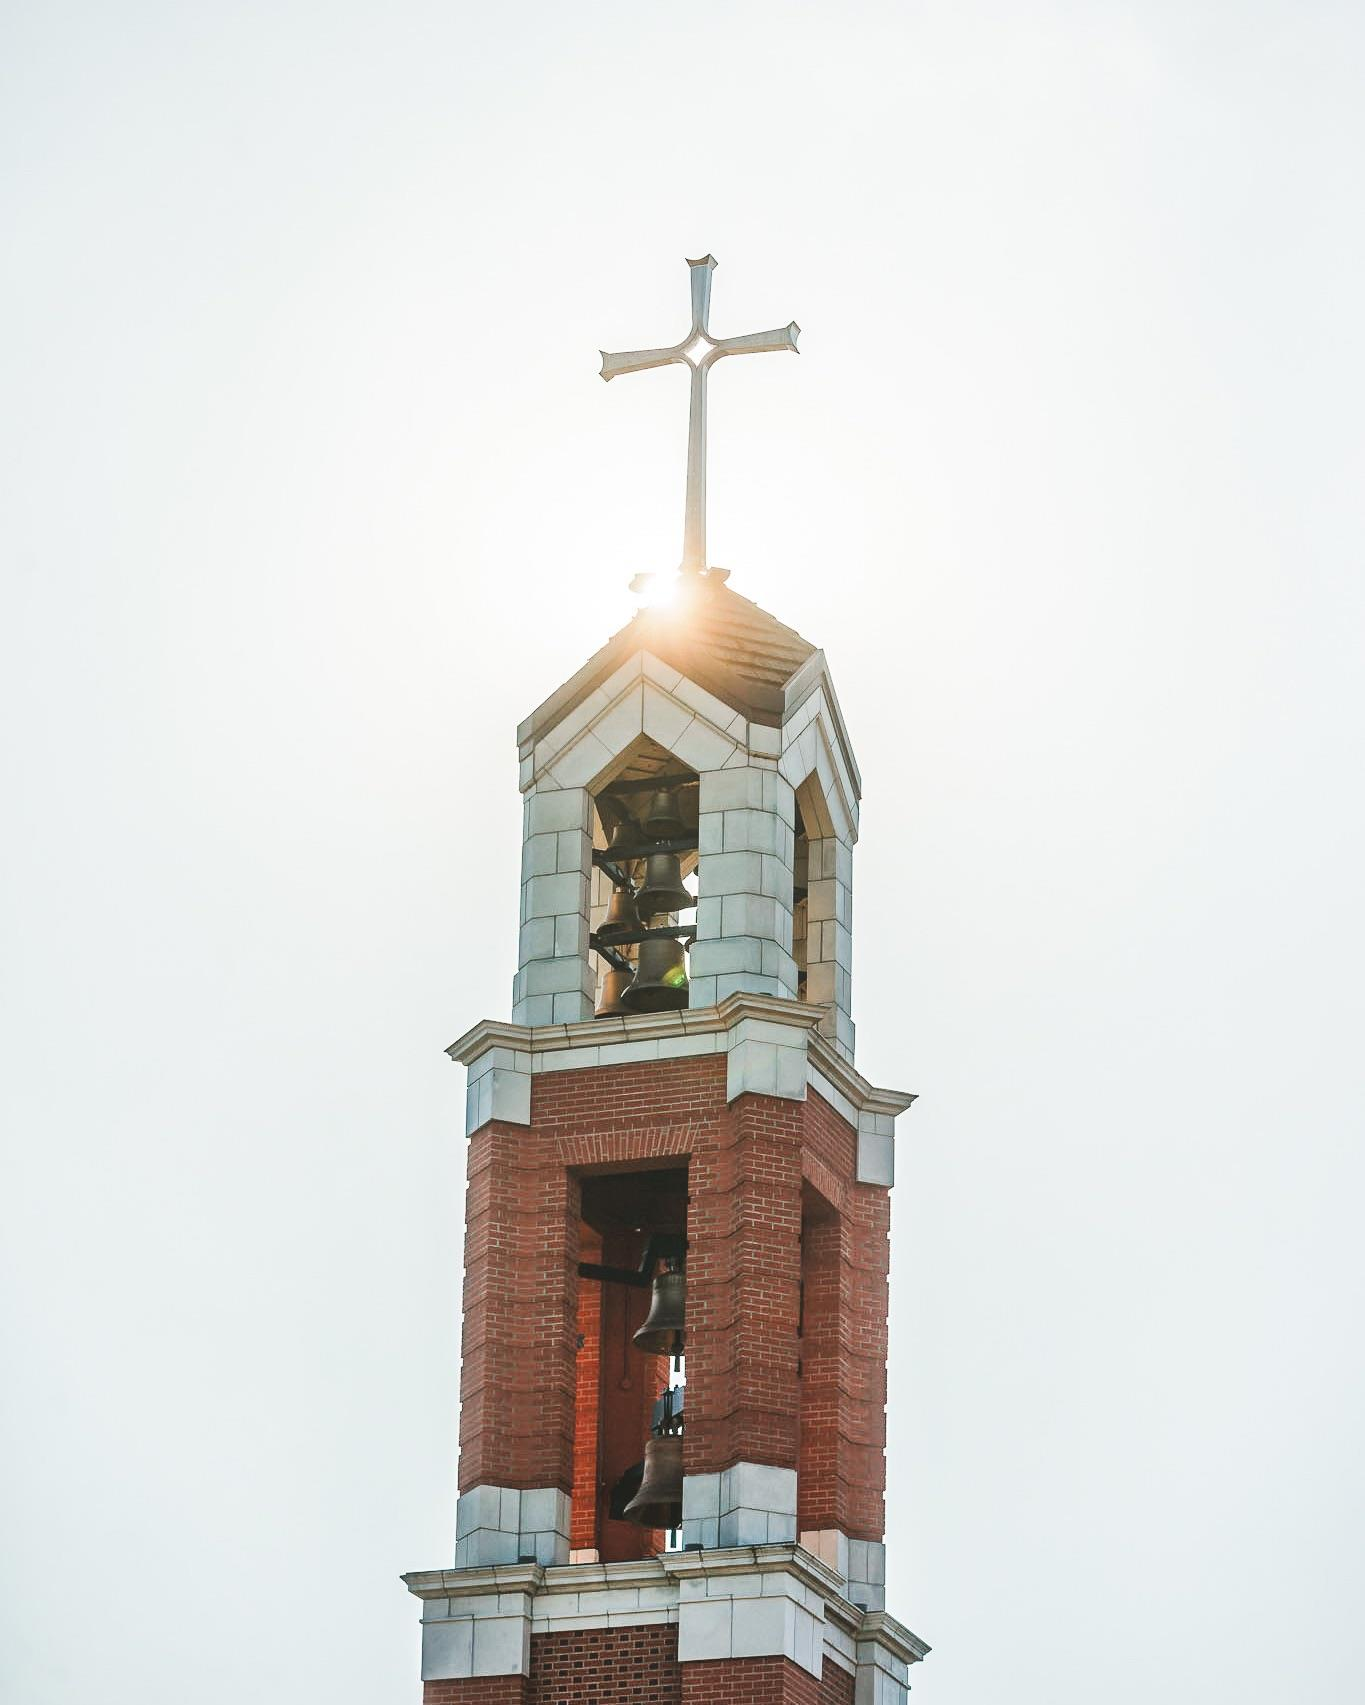 A spring view of the bell tower with the sun gleaming through the Cross.